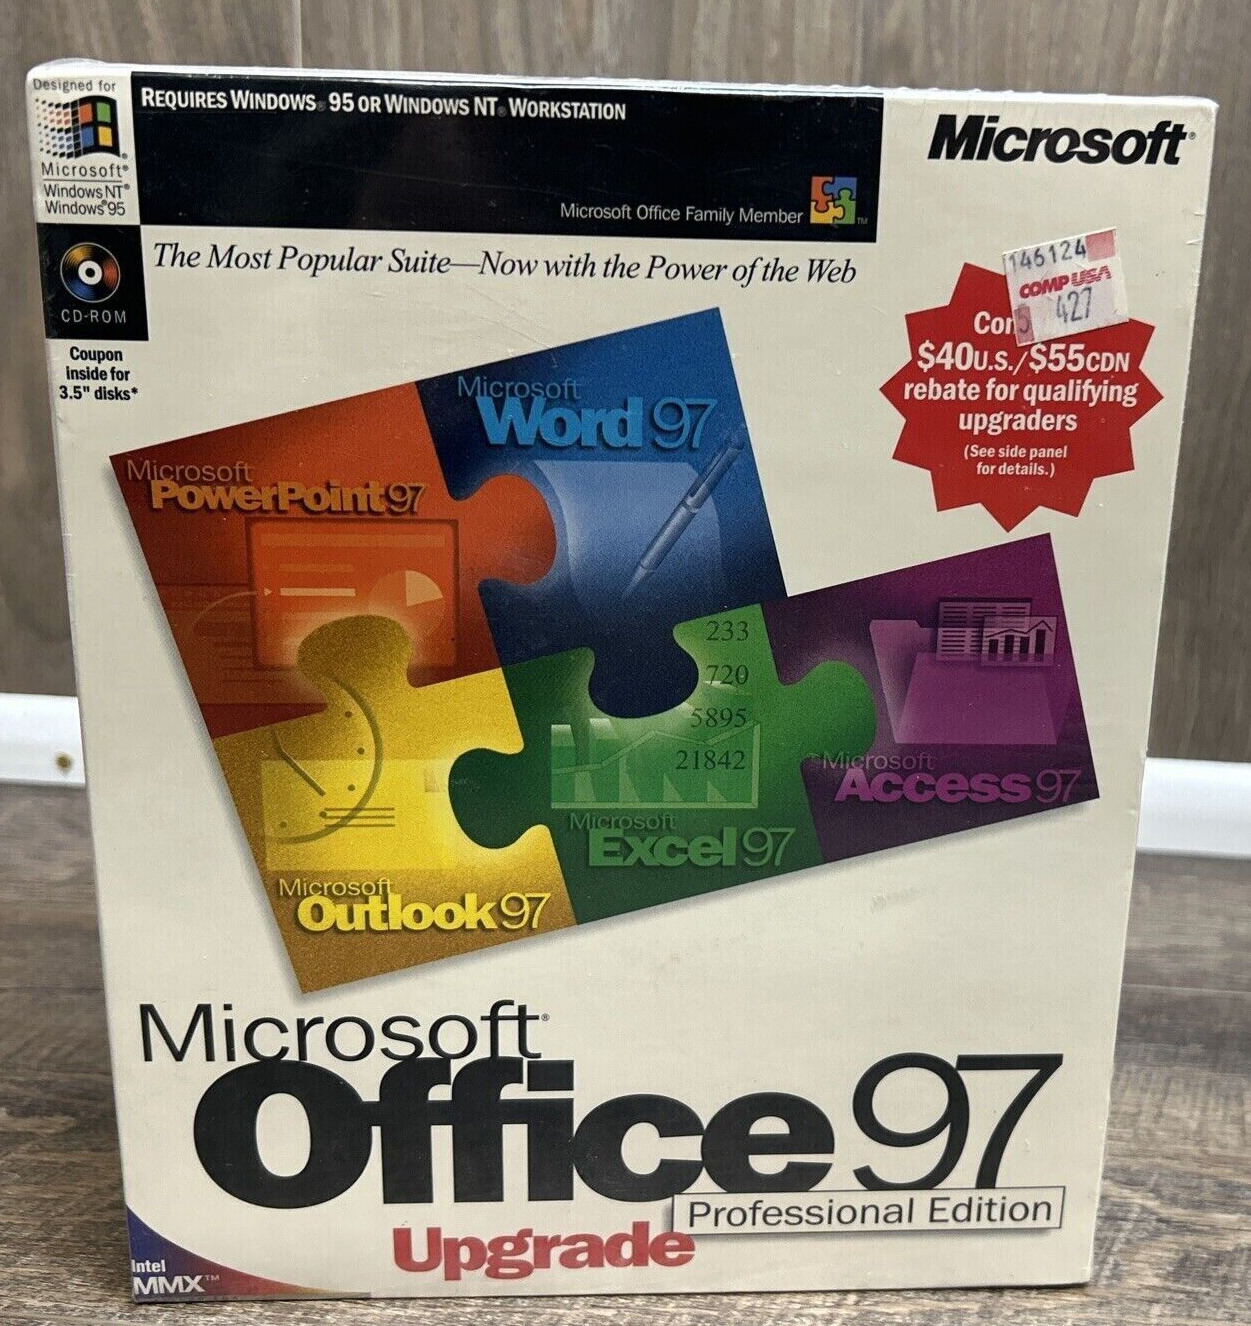 Microsoft Office 97 Professional Edition Upgrade Big Box comes with product key